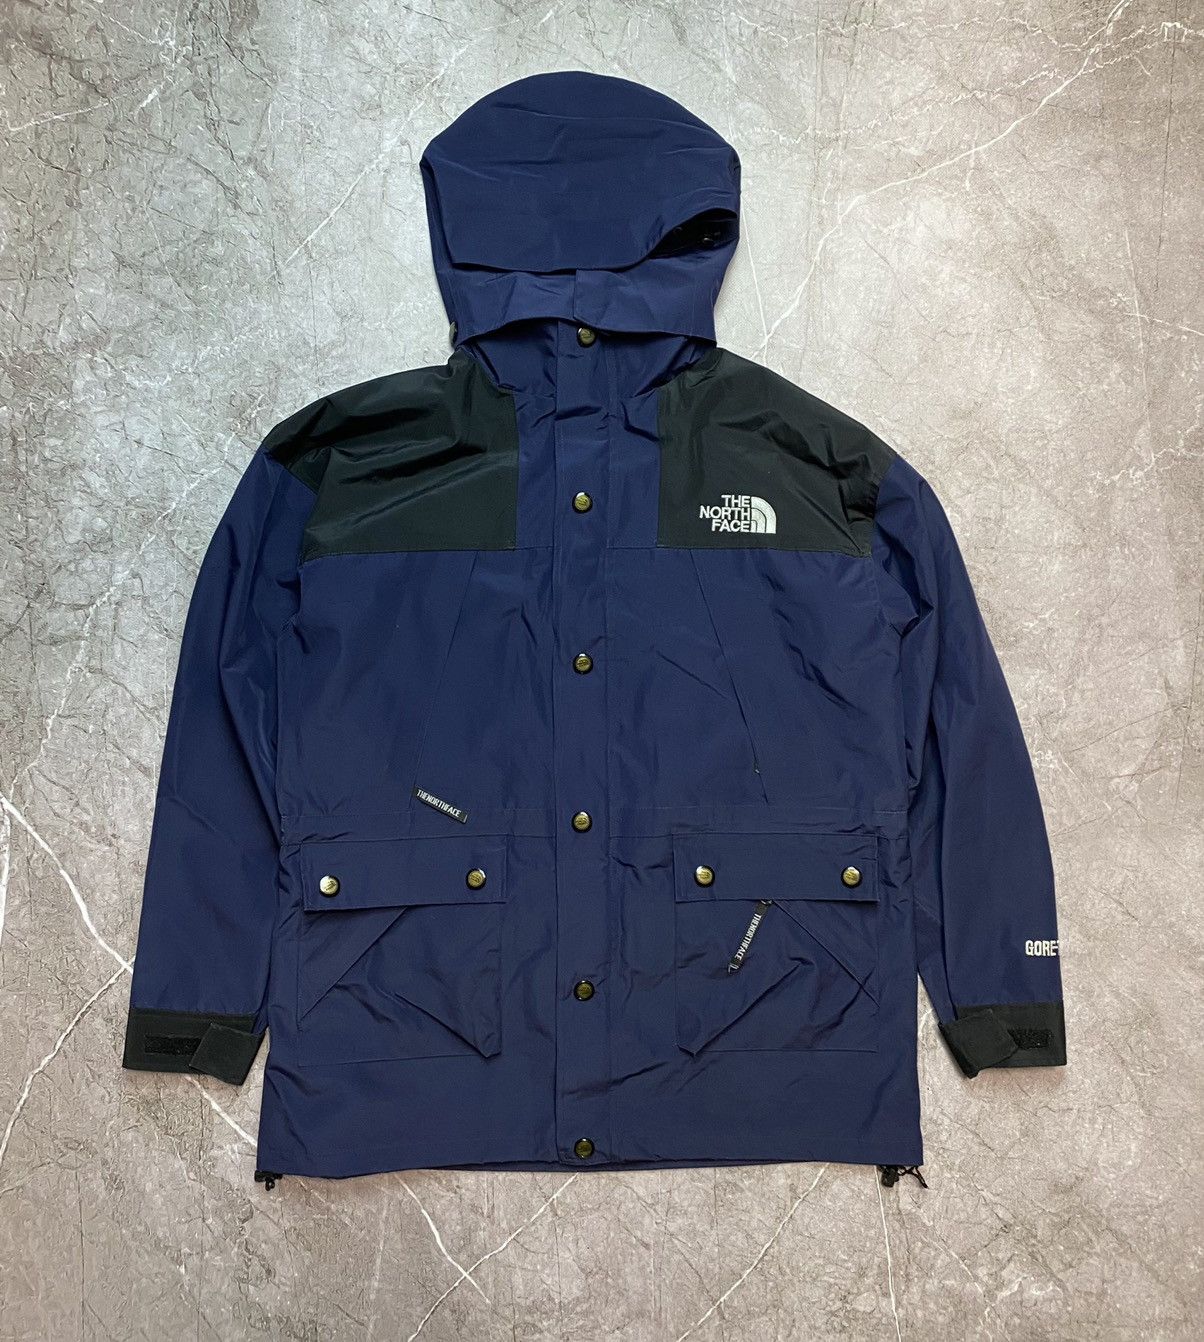 Pre-owned Outdoor Life X The North Face 90's The North Face Goretex Mountain In Navy